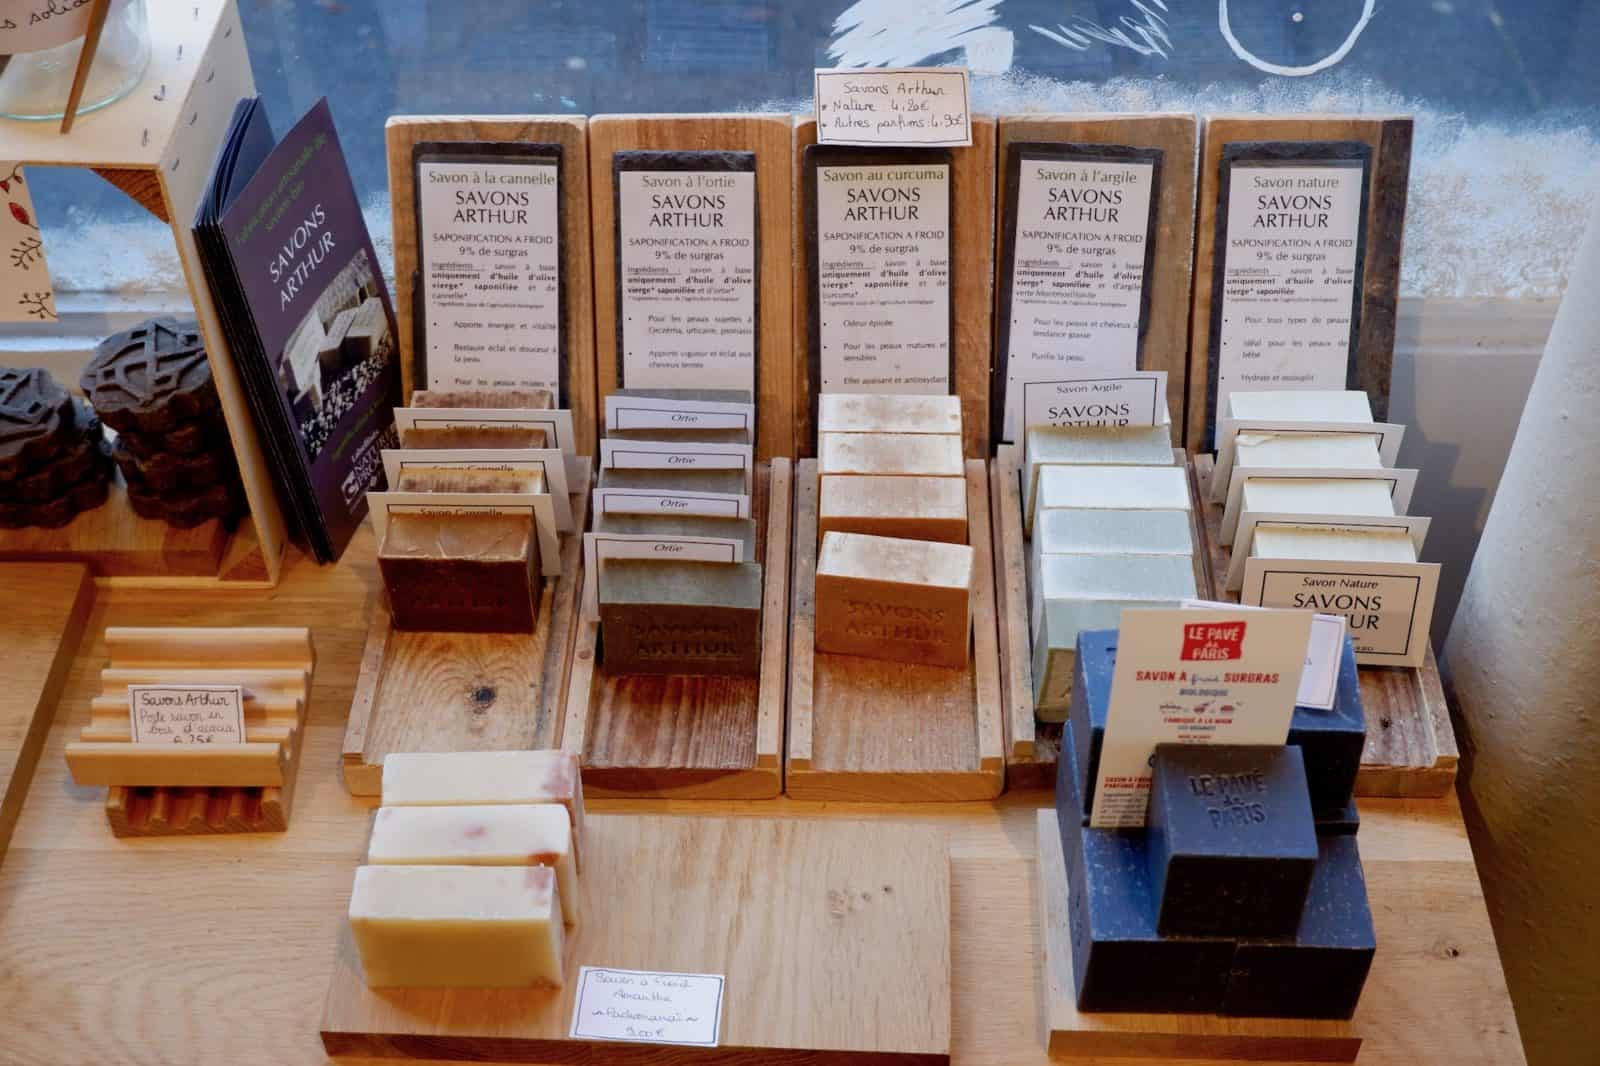 The Maison du Zéro Déchet (house of zero waste) is a concept store in Paris where you can buy sustainable handmade soap that smell great, like small blocks of Arthur soaps. 